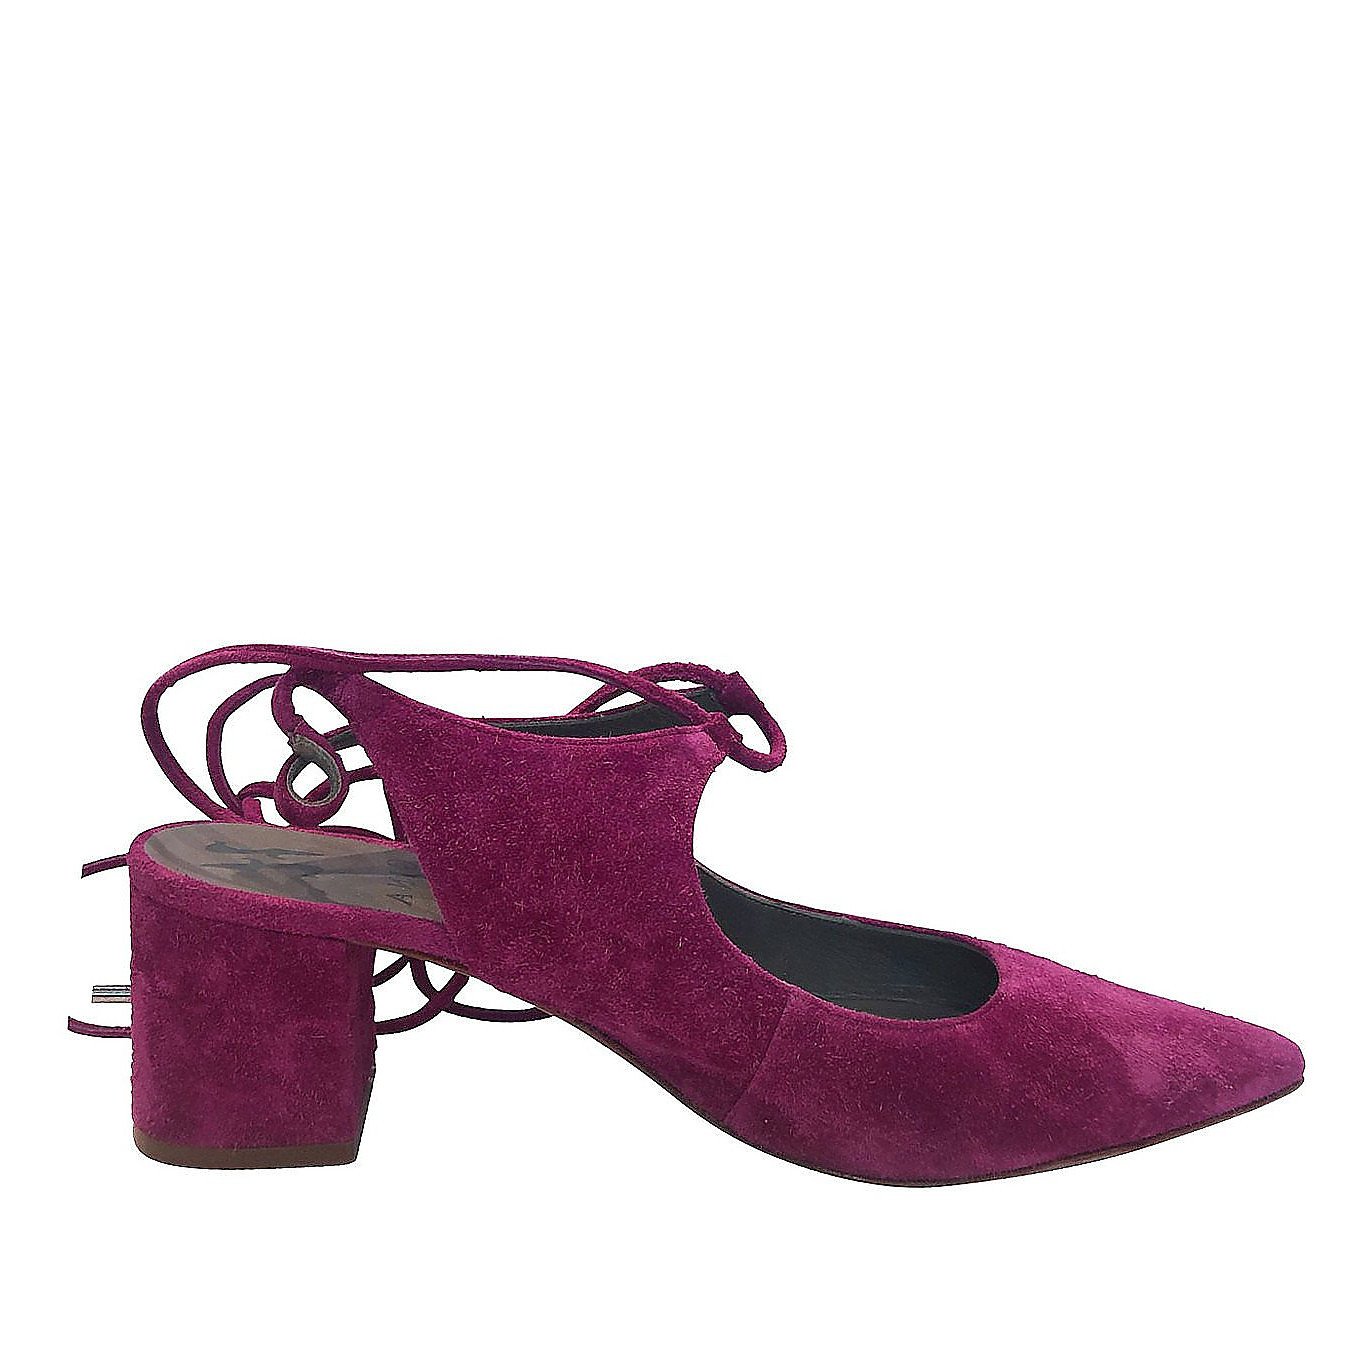 Gina Suede Tie-Ankle Pumps